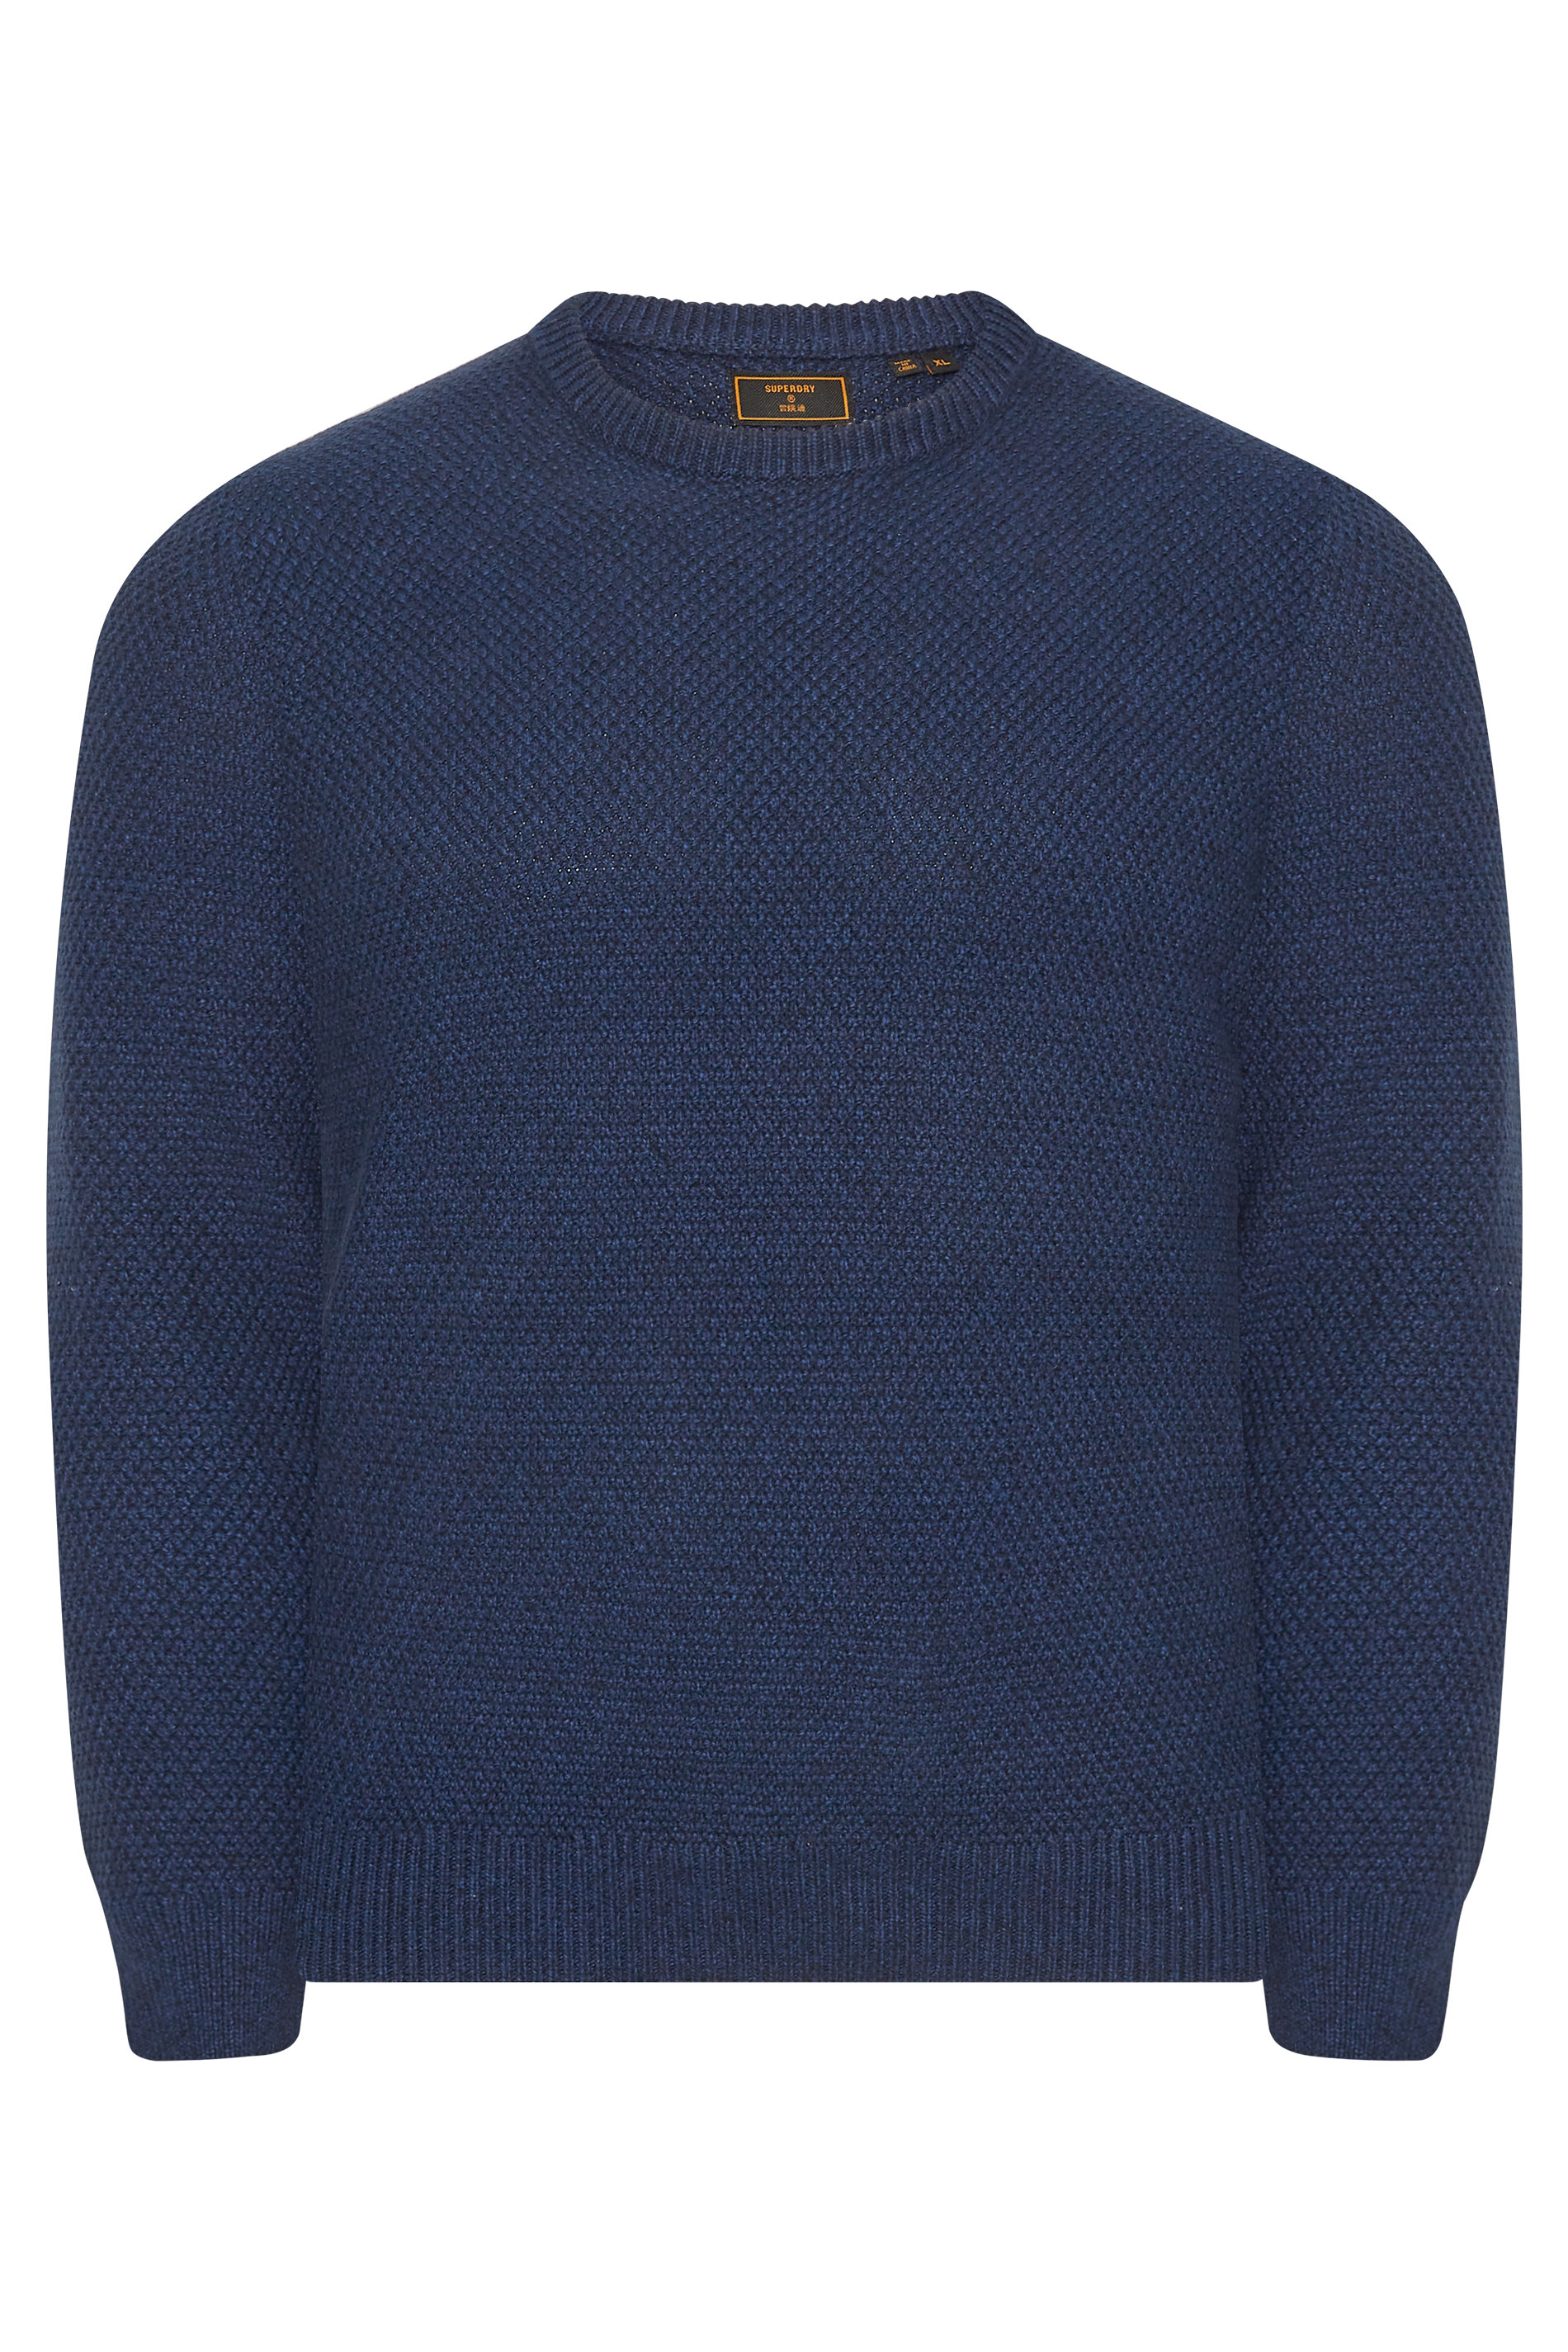 Big & Tall SUPERDRY Navy Blue Knitted Jumper | BadRhino 1